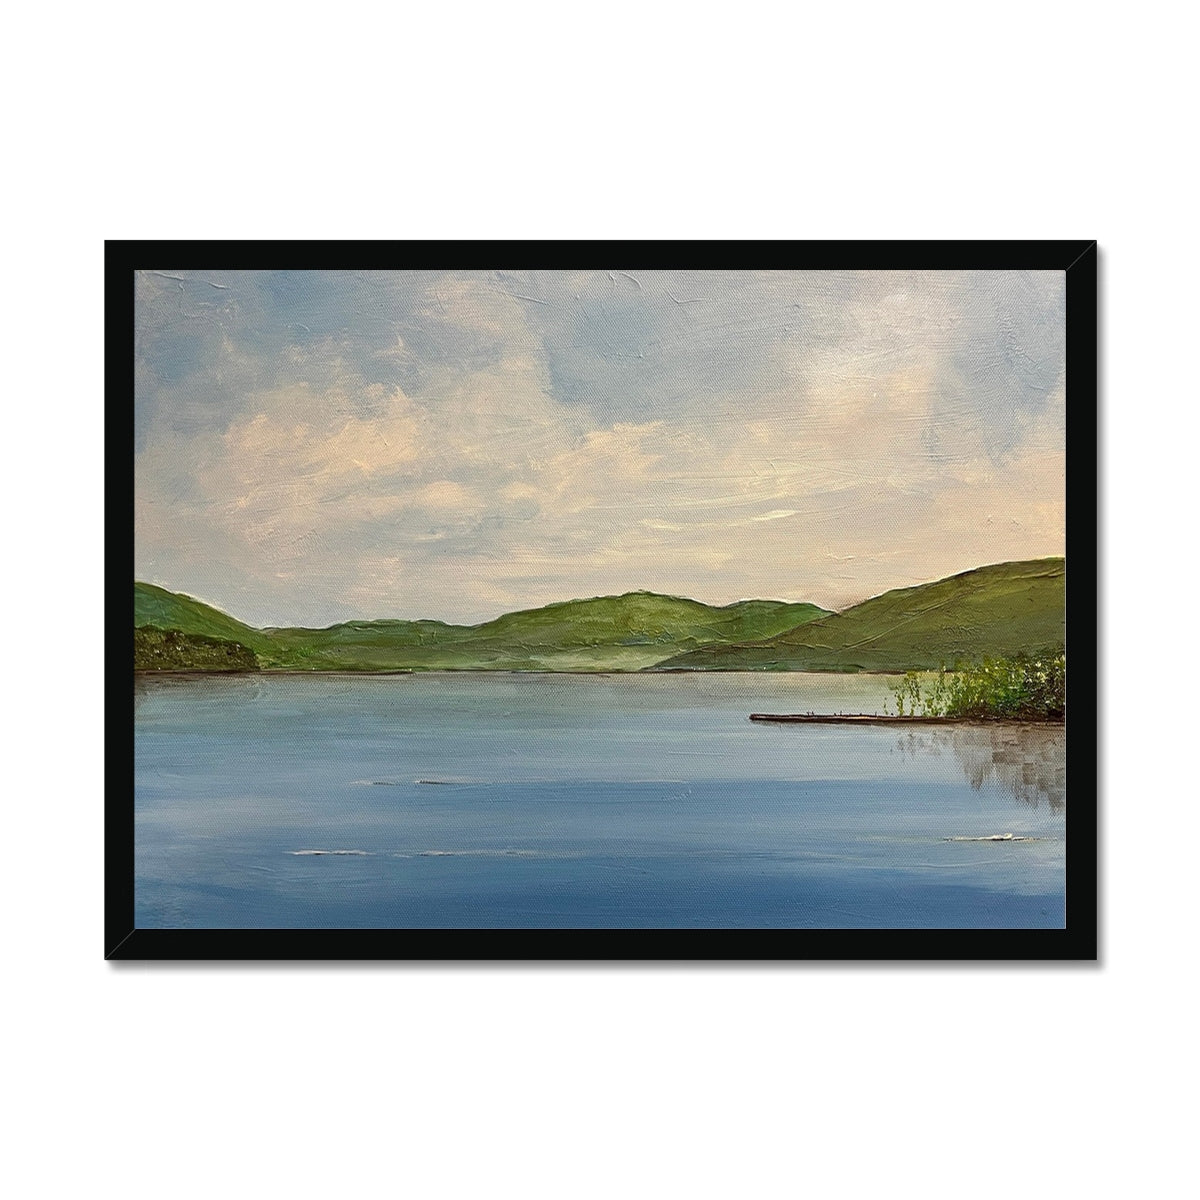 Loch Tay ii Painting | Framed Prints From Scotland-Framed Prints-Scottish Lochs & Mountains Art Gallery-A2 Landscape-Black Frame-Paintings, Prints, Homeware, Art Gifts From Scotland By Scottish Artist Kevin Hunter